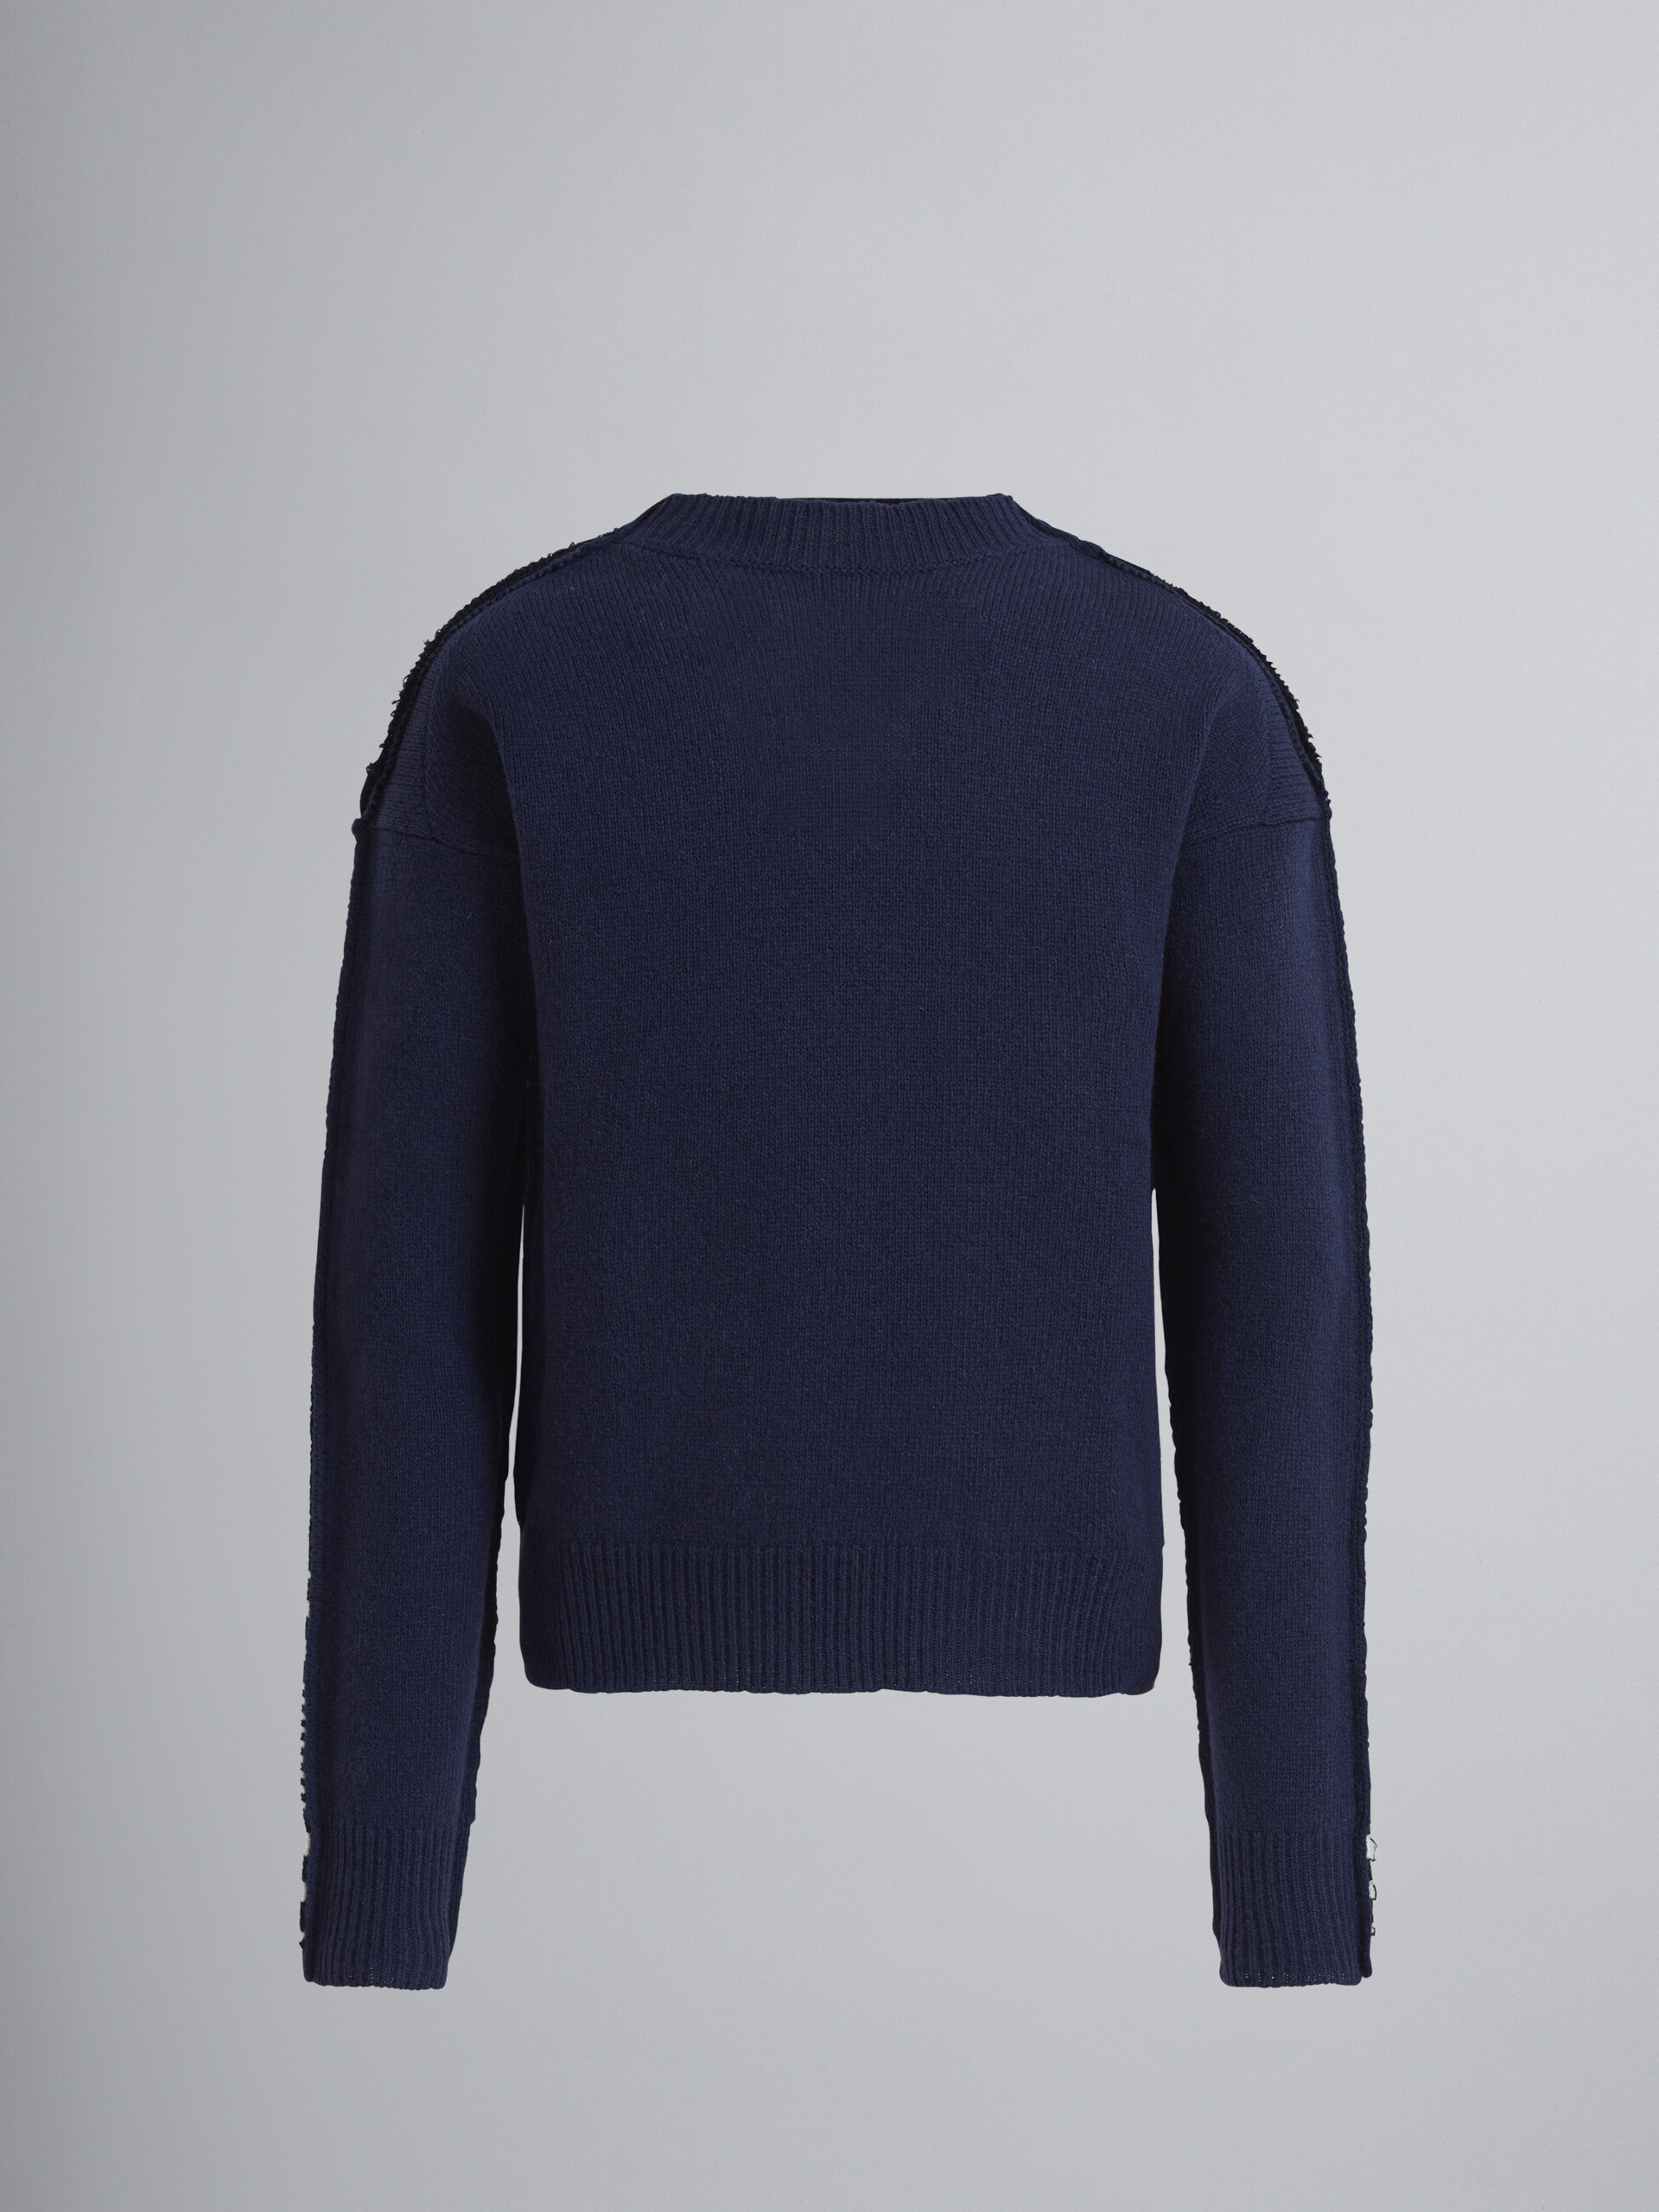 Mixed virgin wool sweater with striped pattern on the back - Pullovers - Image 1